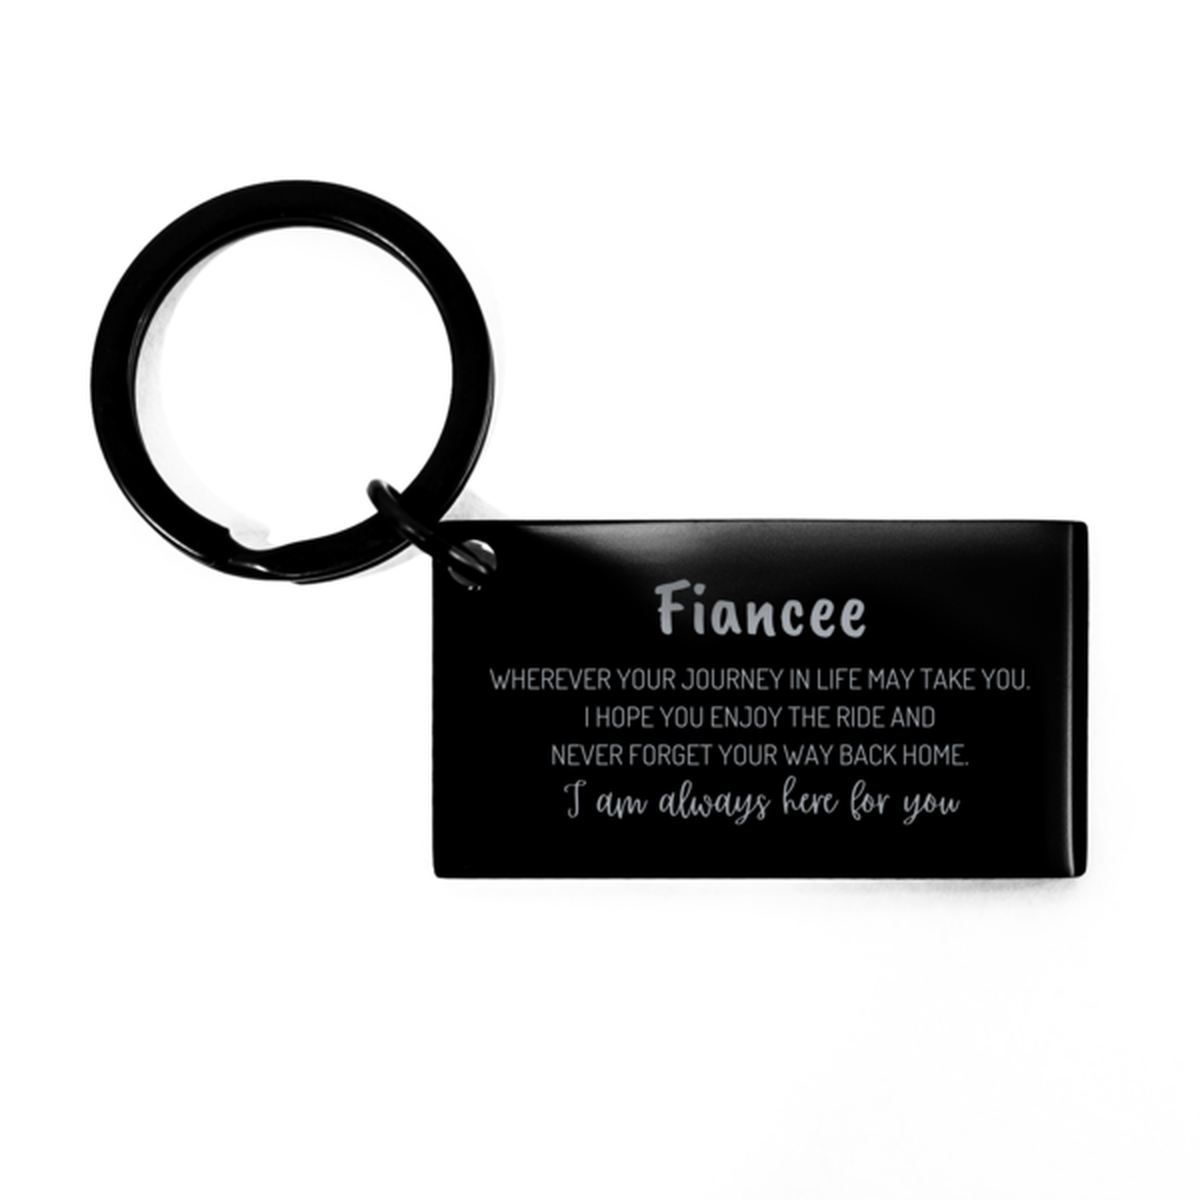 Fiancee wherever your journey in life may take you, I am always here for you Fiancee Keychain, Awesome Christmas Gifts For Fiancee, Fiancee Birthday Gifts for Men Women Family Loved One